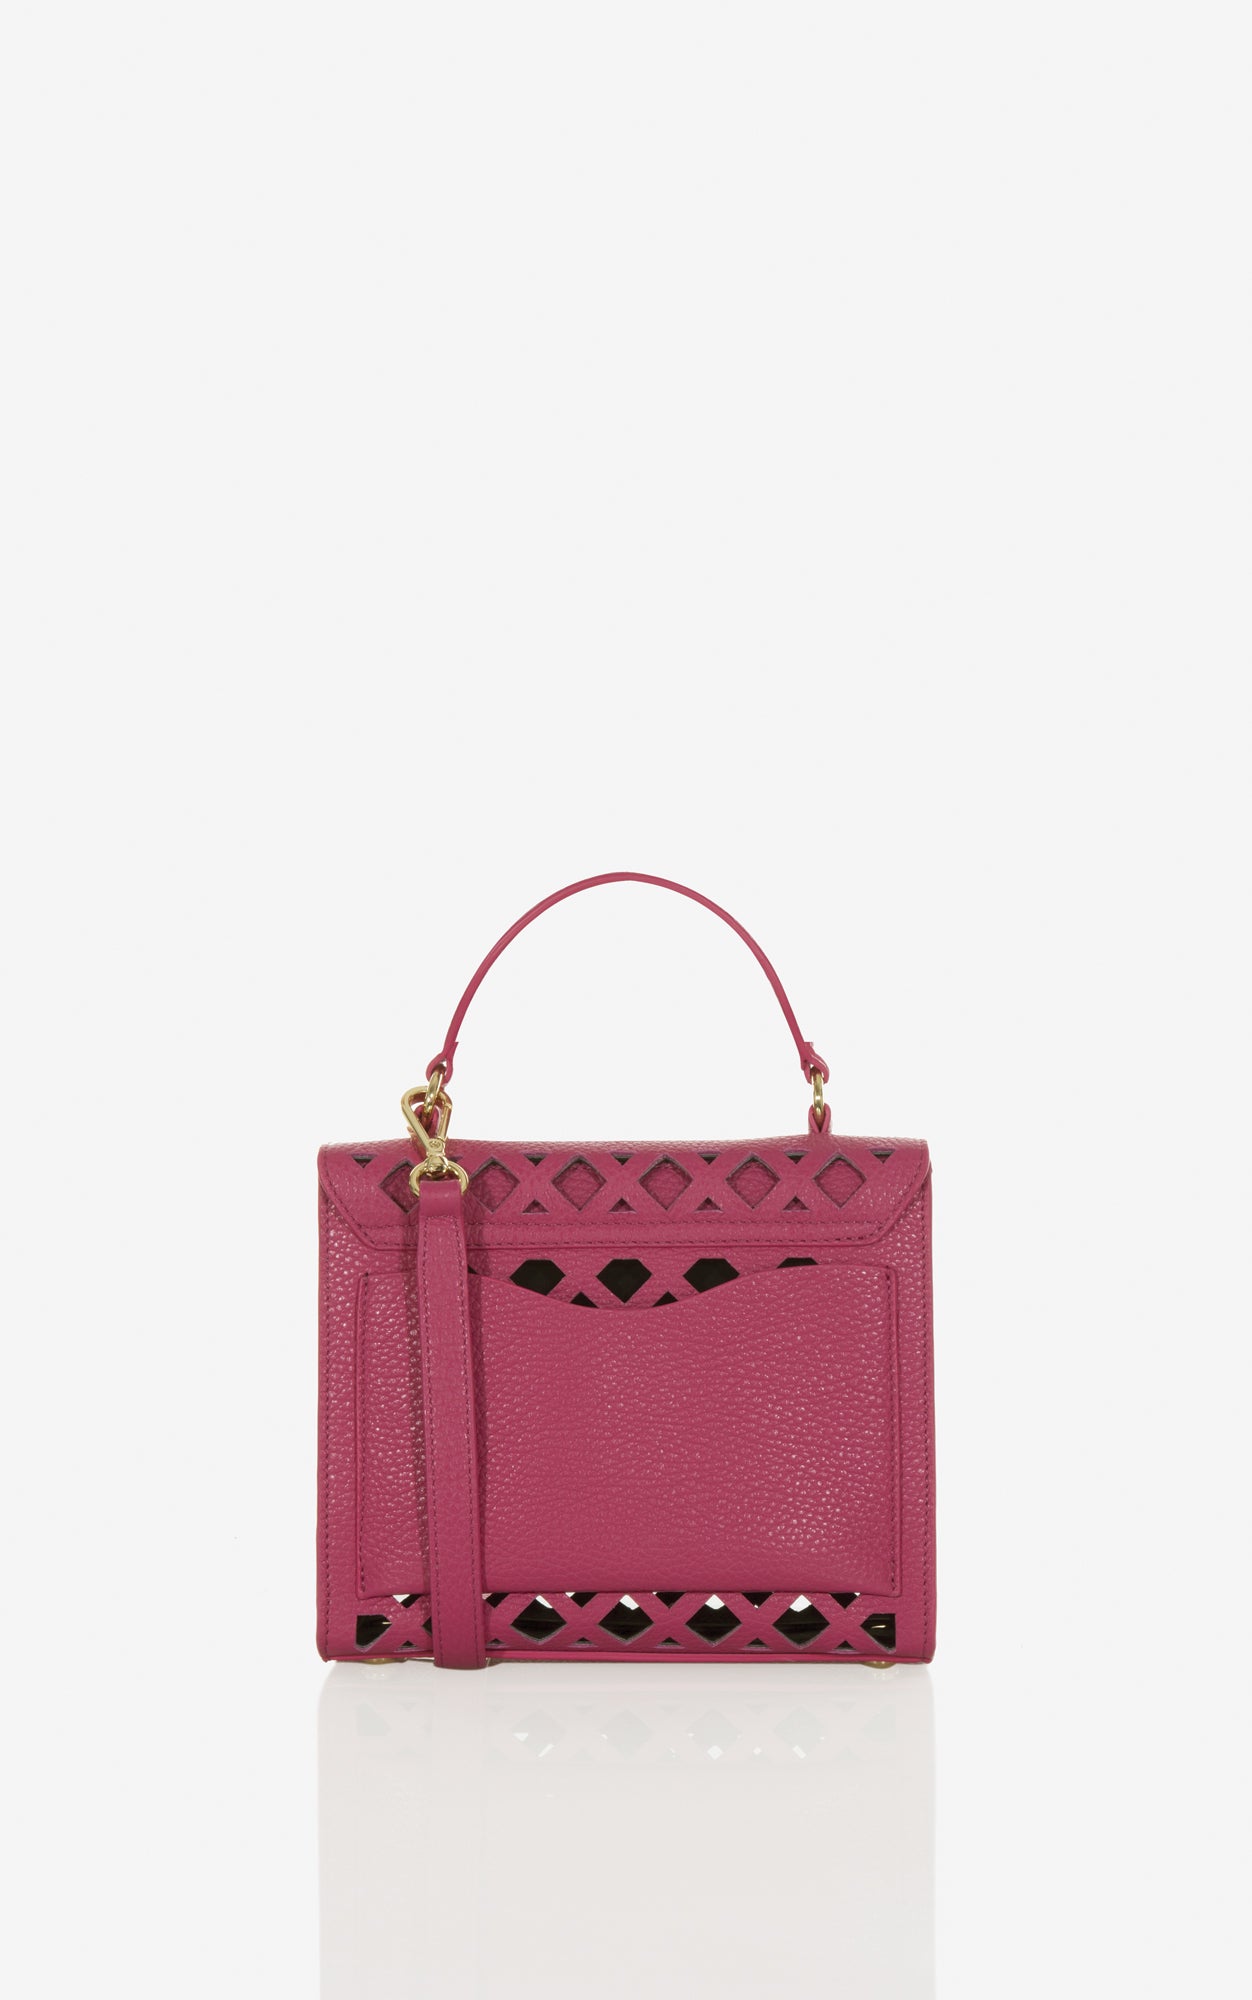 Penelope S In Pink Perforated Grainy Leather